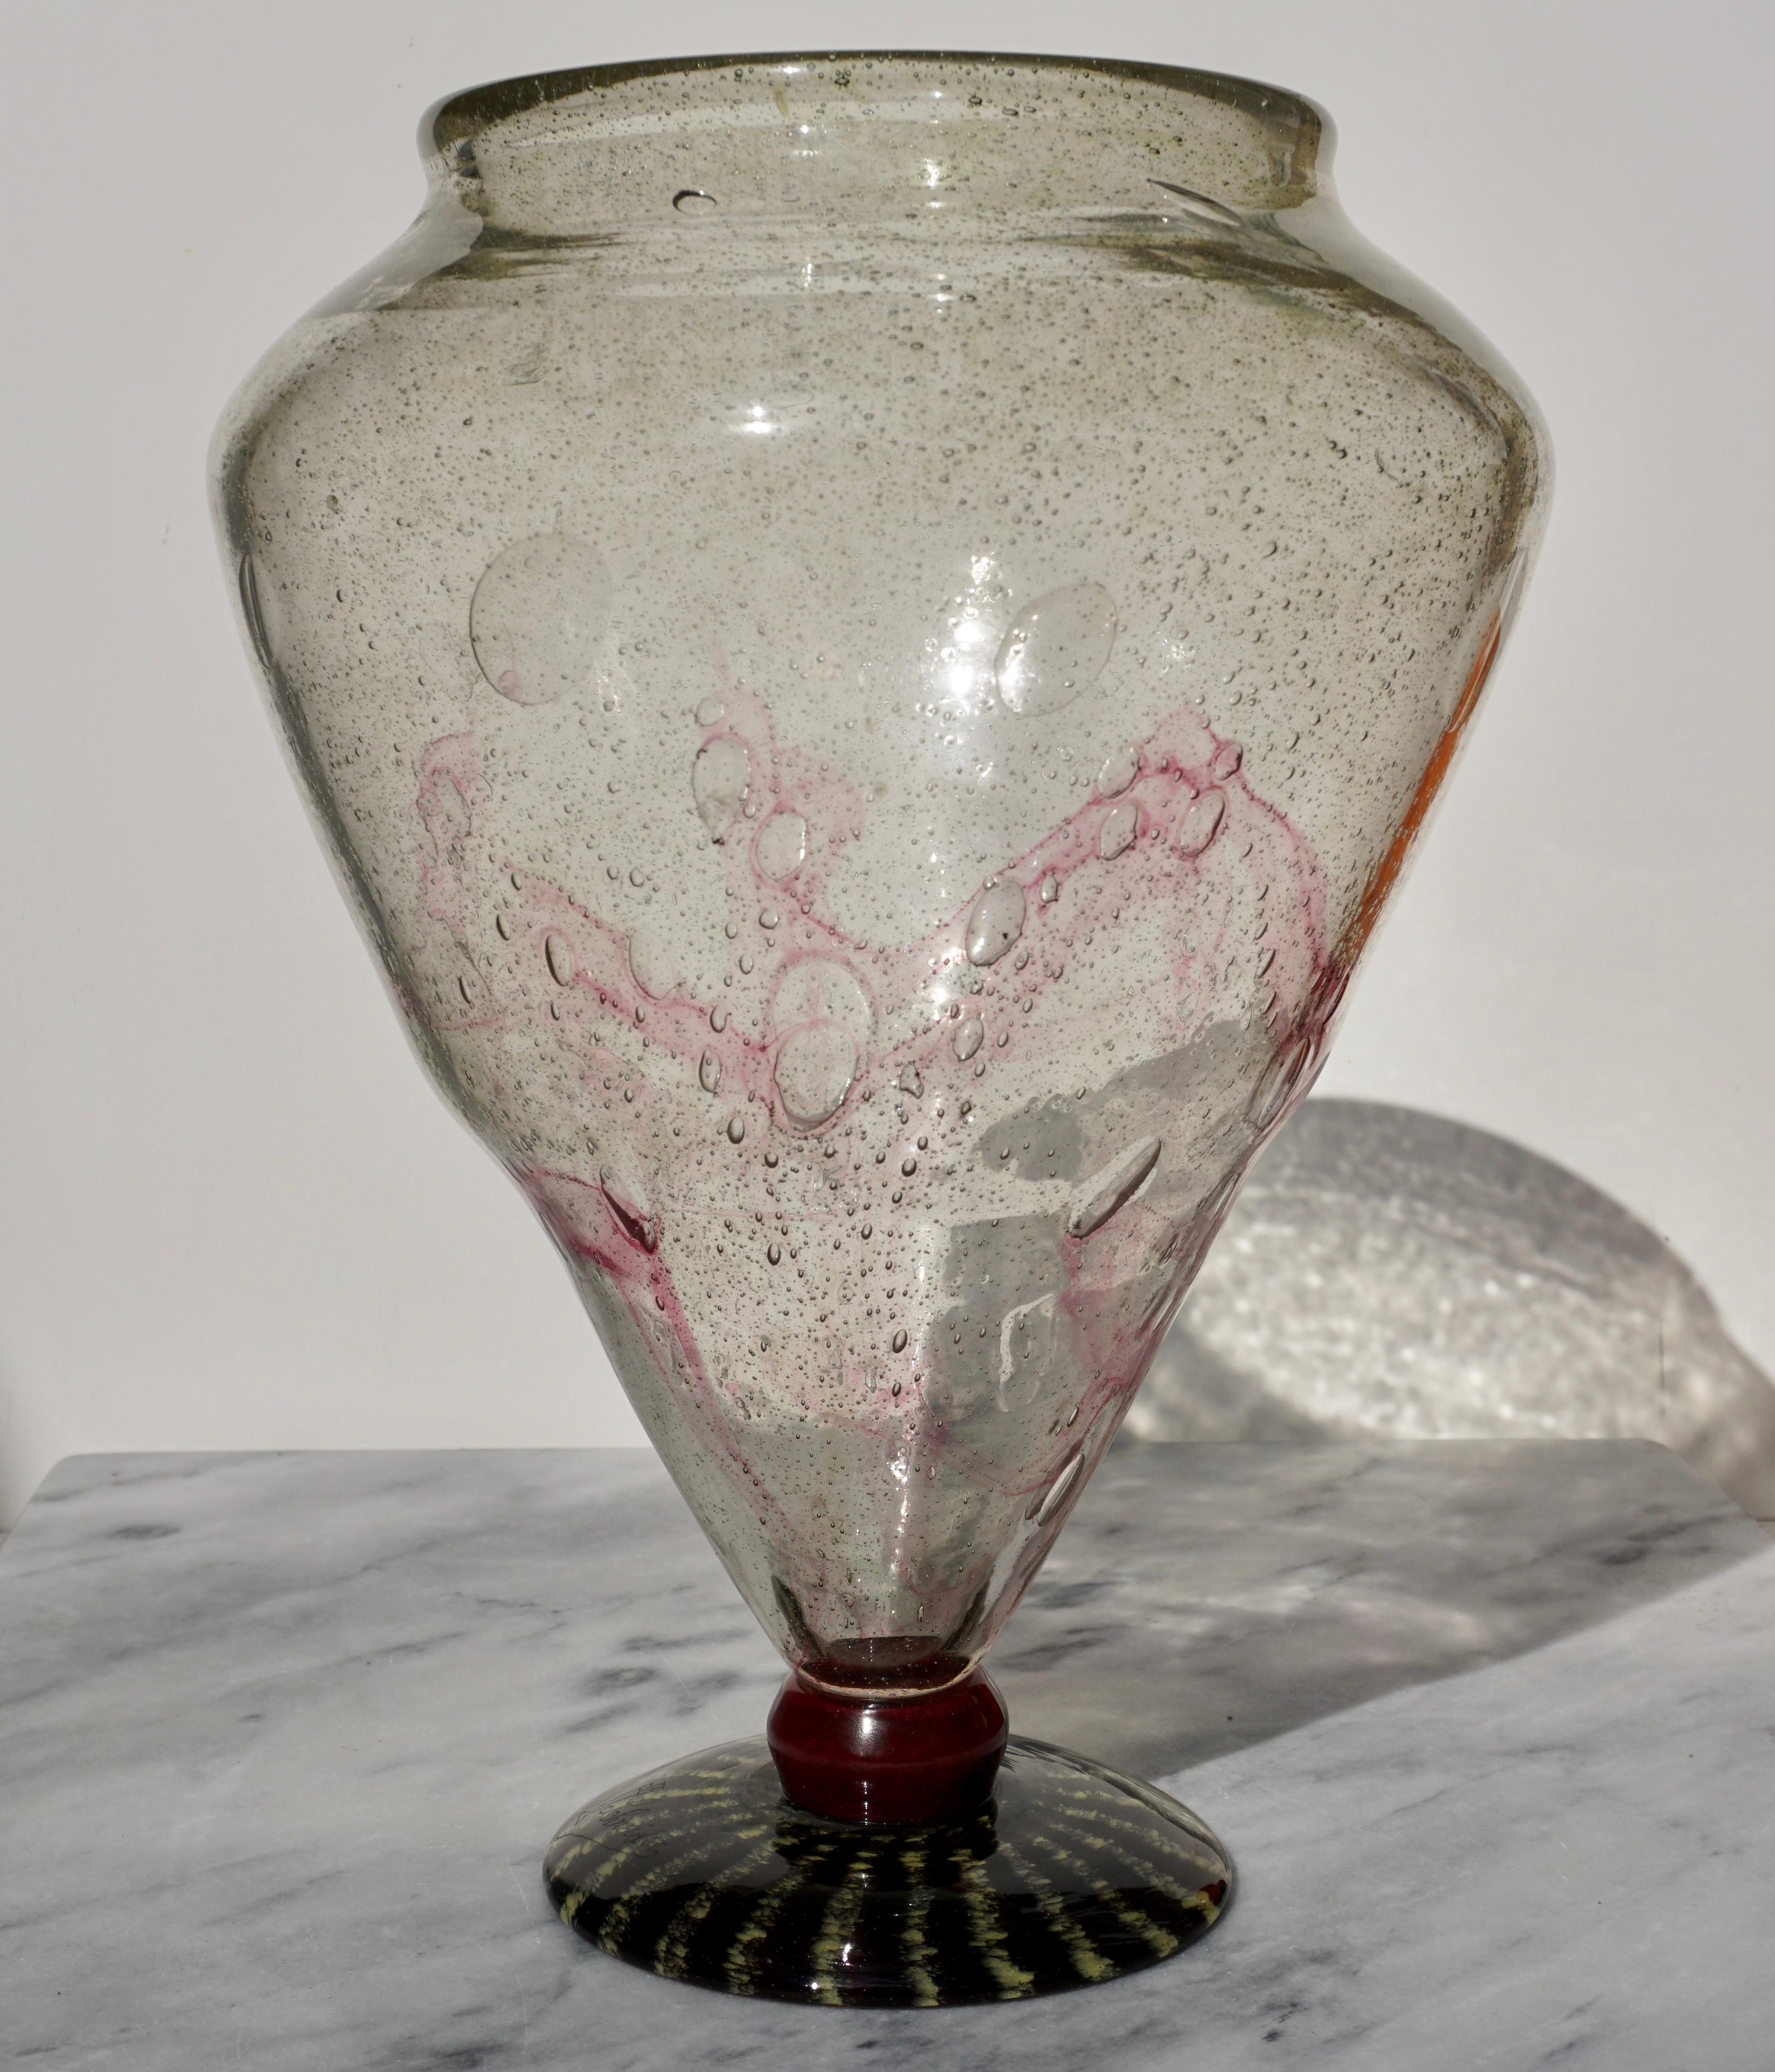 A monumental Art Deco air bubbles blown glass urn form vase in yellow and crimson cintra with a striated yellow and burgundy foot

Signed with an etched Schneider and hour glass

Measures: Height 13.5 inches
Diameter 9.75 inches

Condition: